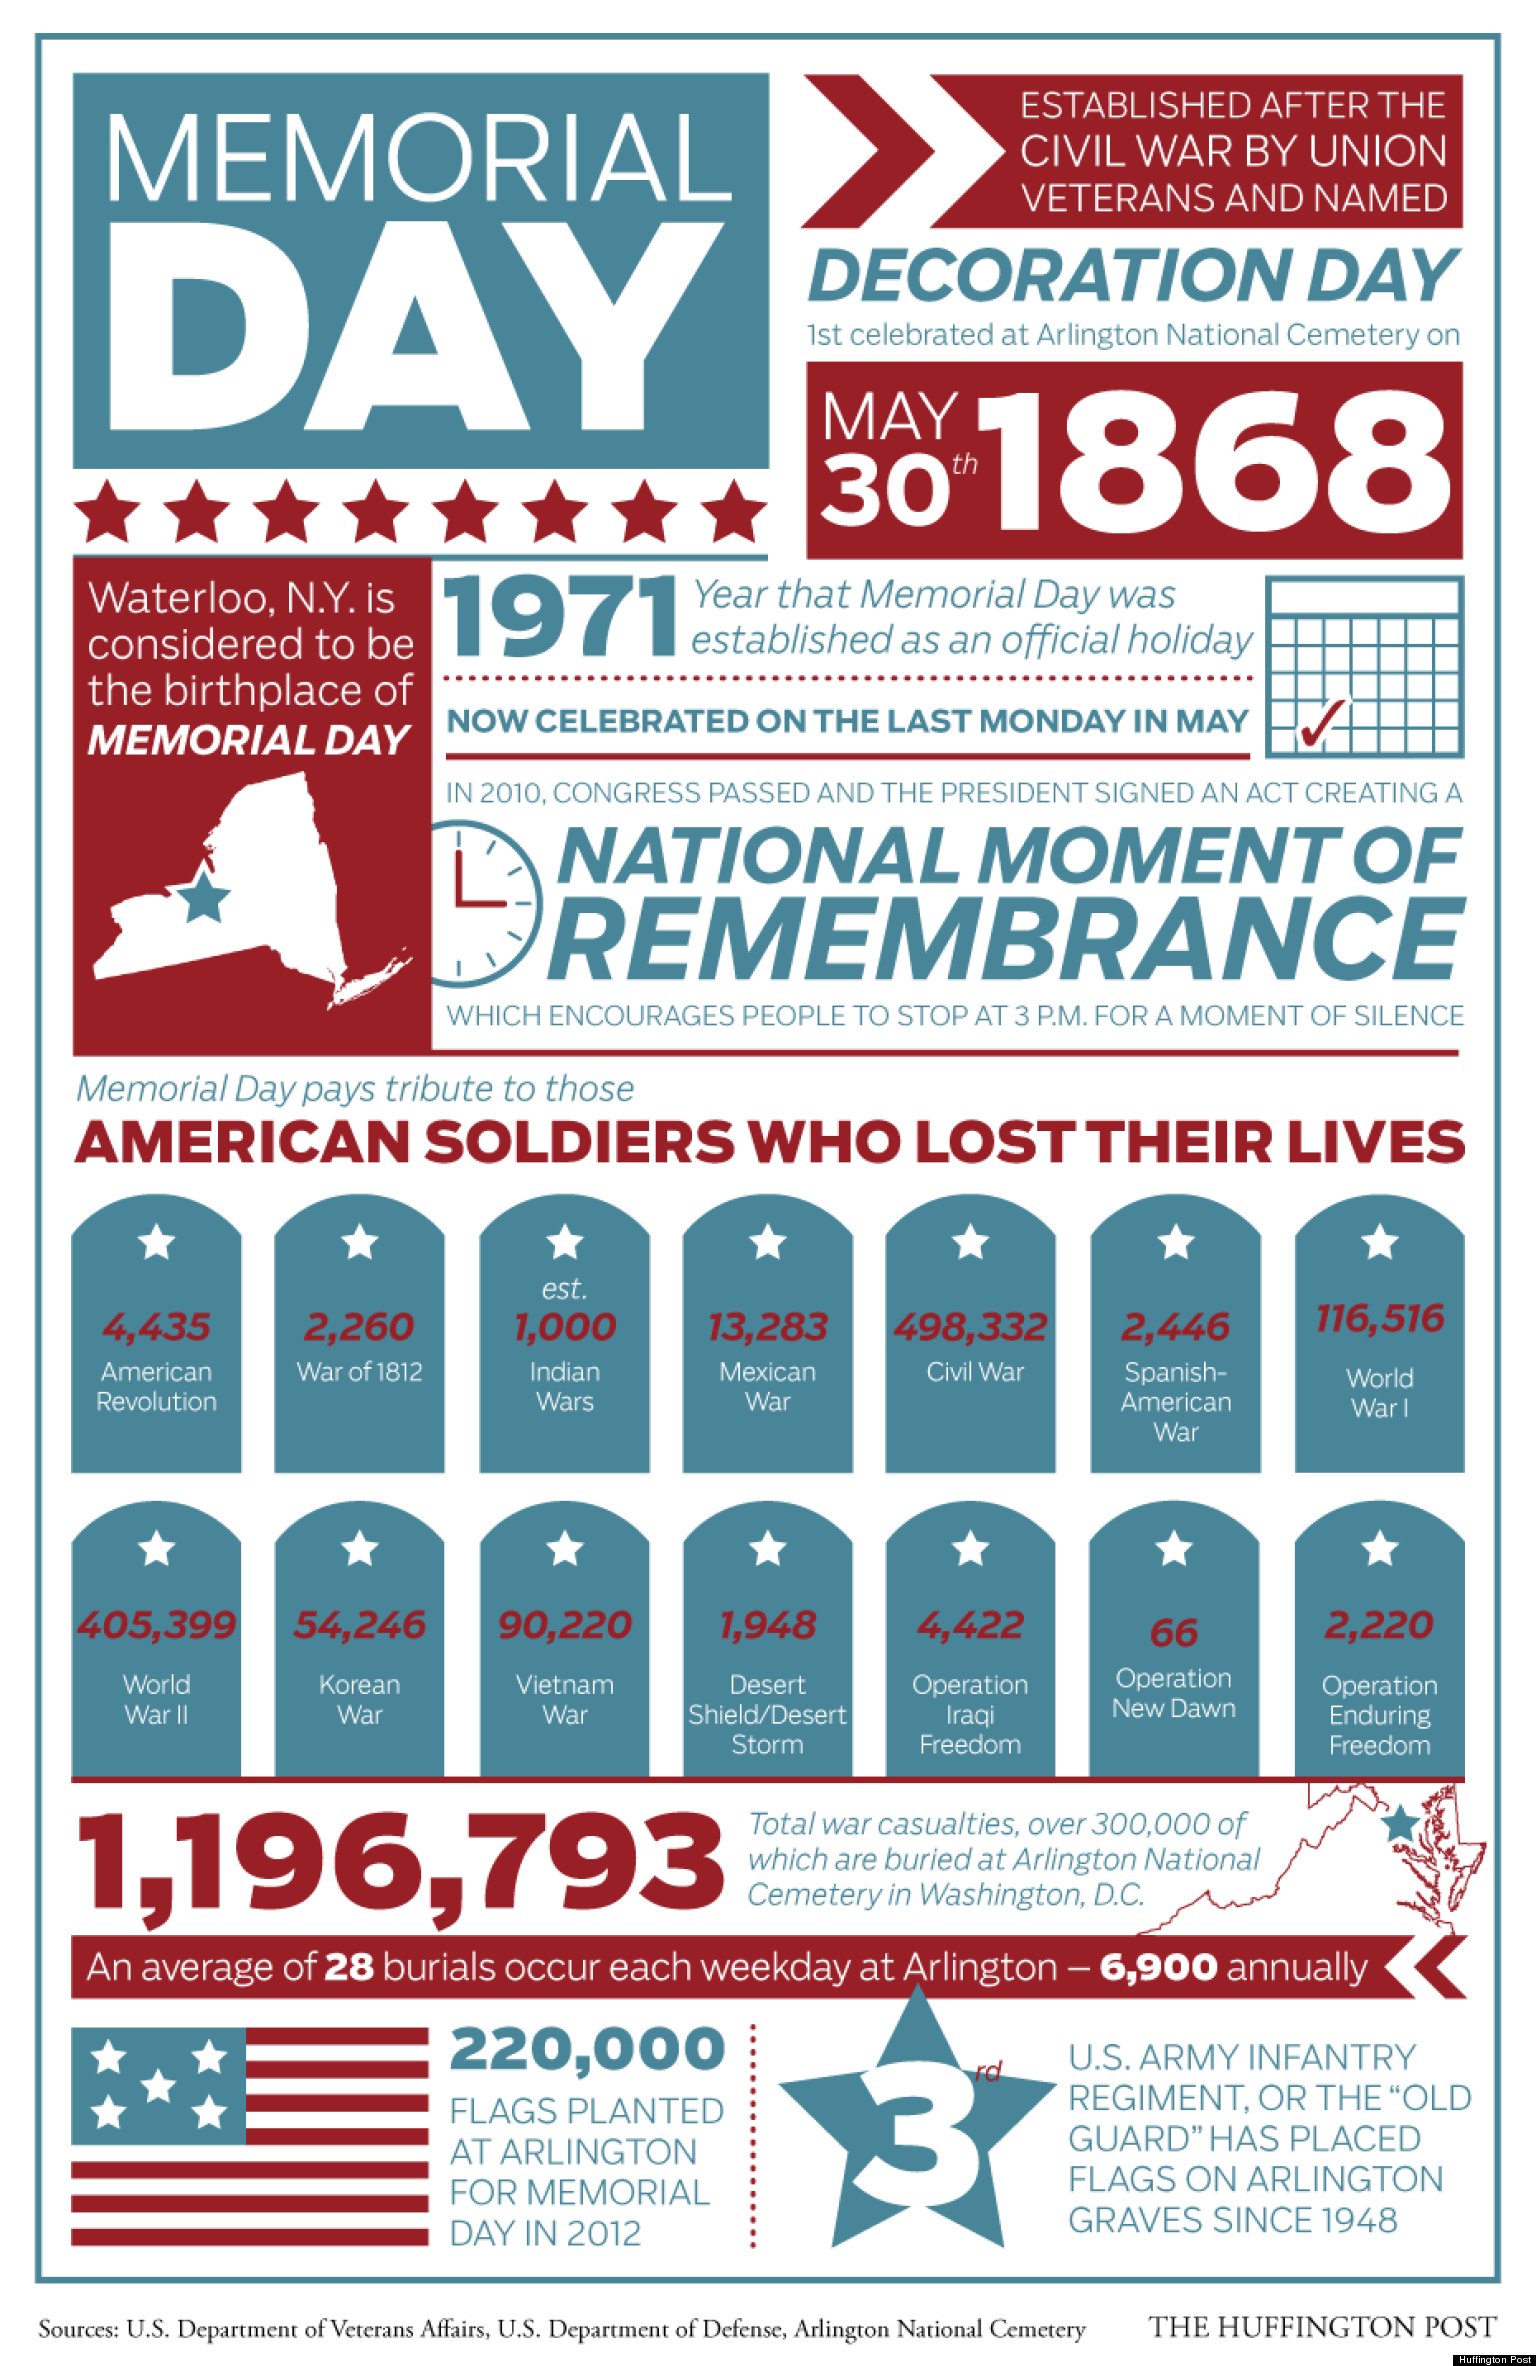 Memorial Day 2013: History, Facts By The Numbers | HuffPost